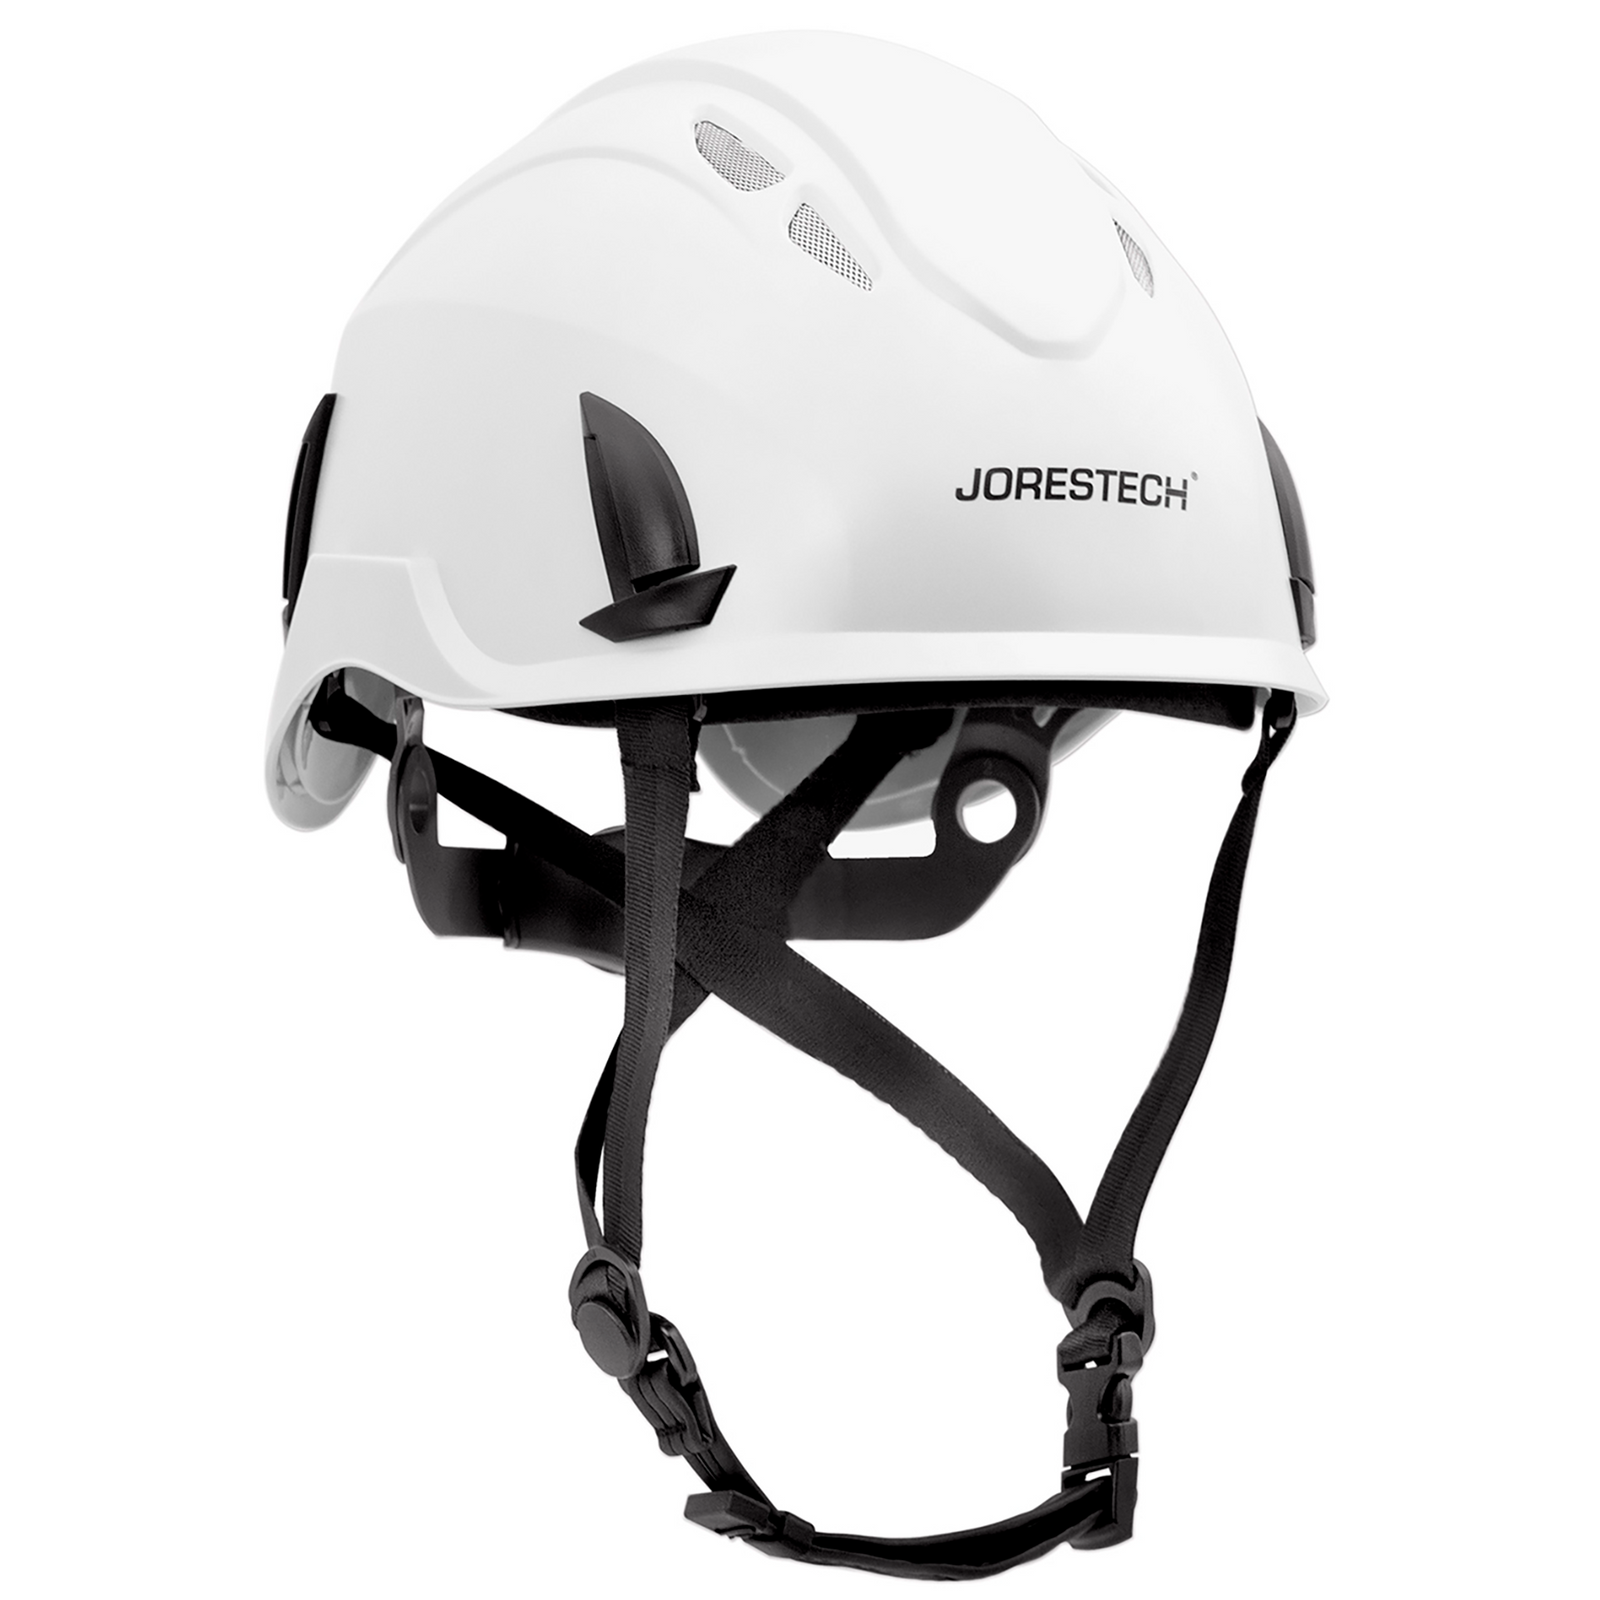 Diagonal view of the white Ventilated JORESTECH® hard hat with anti intrusion grille and adjustable 4 point suspension with chin strap